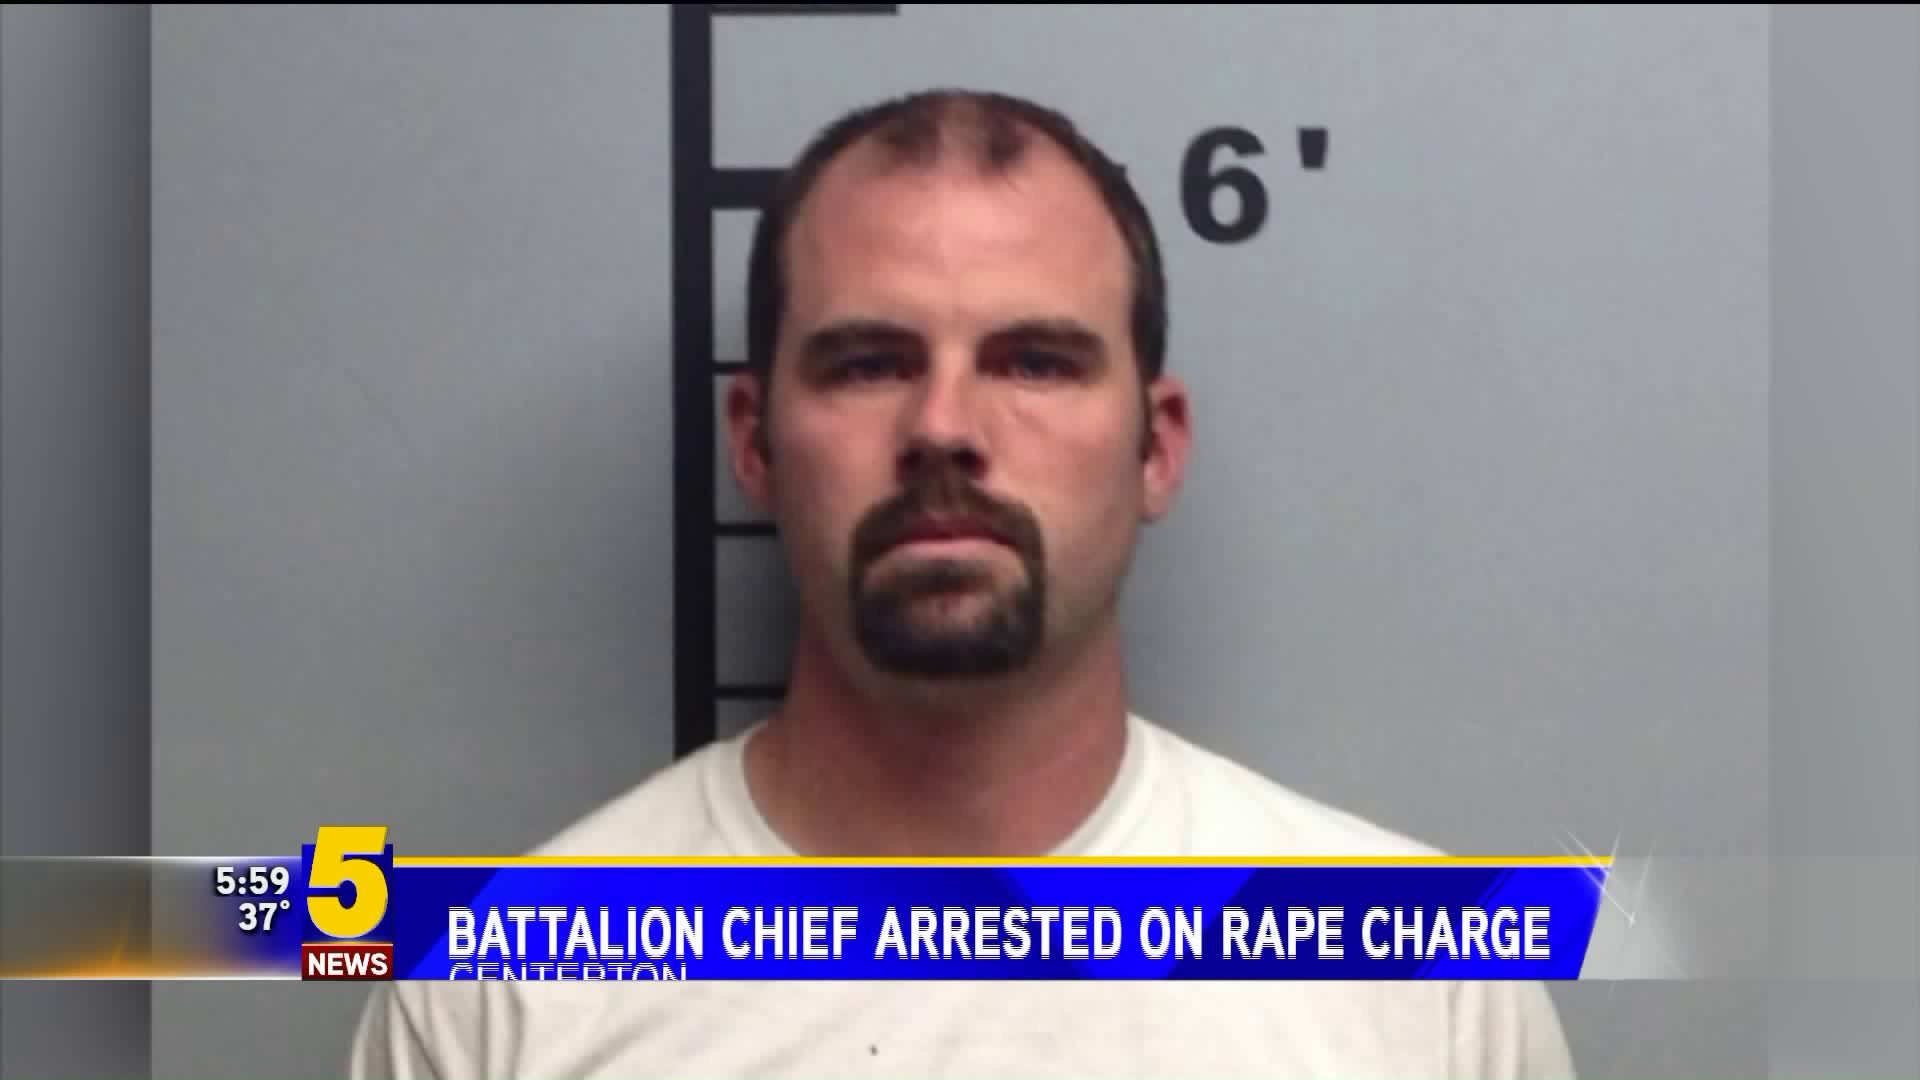 Battalion Fire Chief In Centerton Arrested On Rape Charge